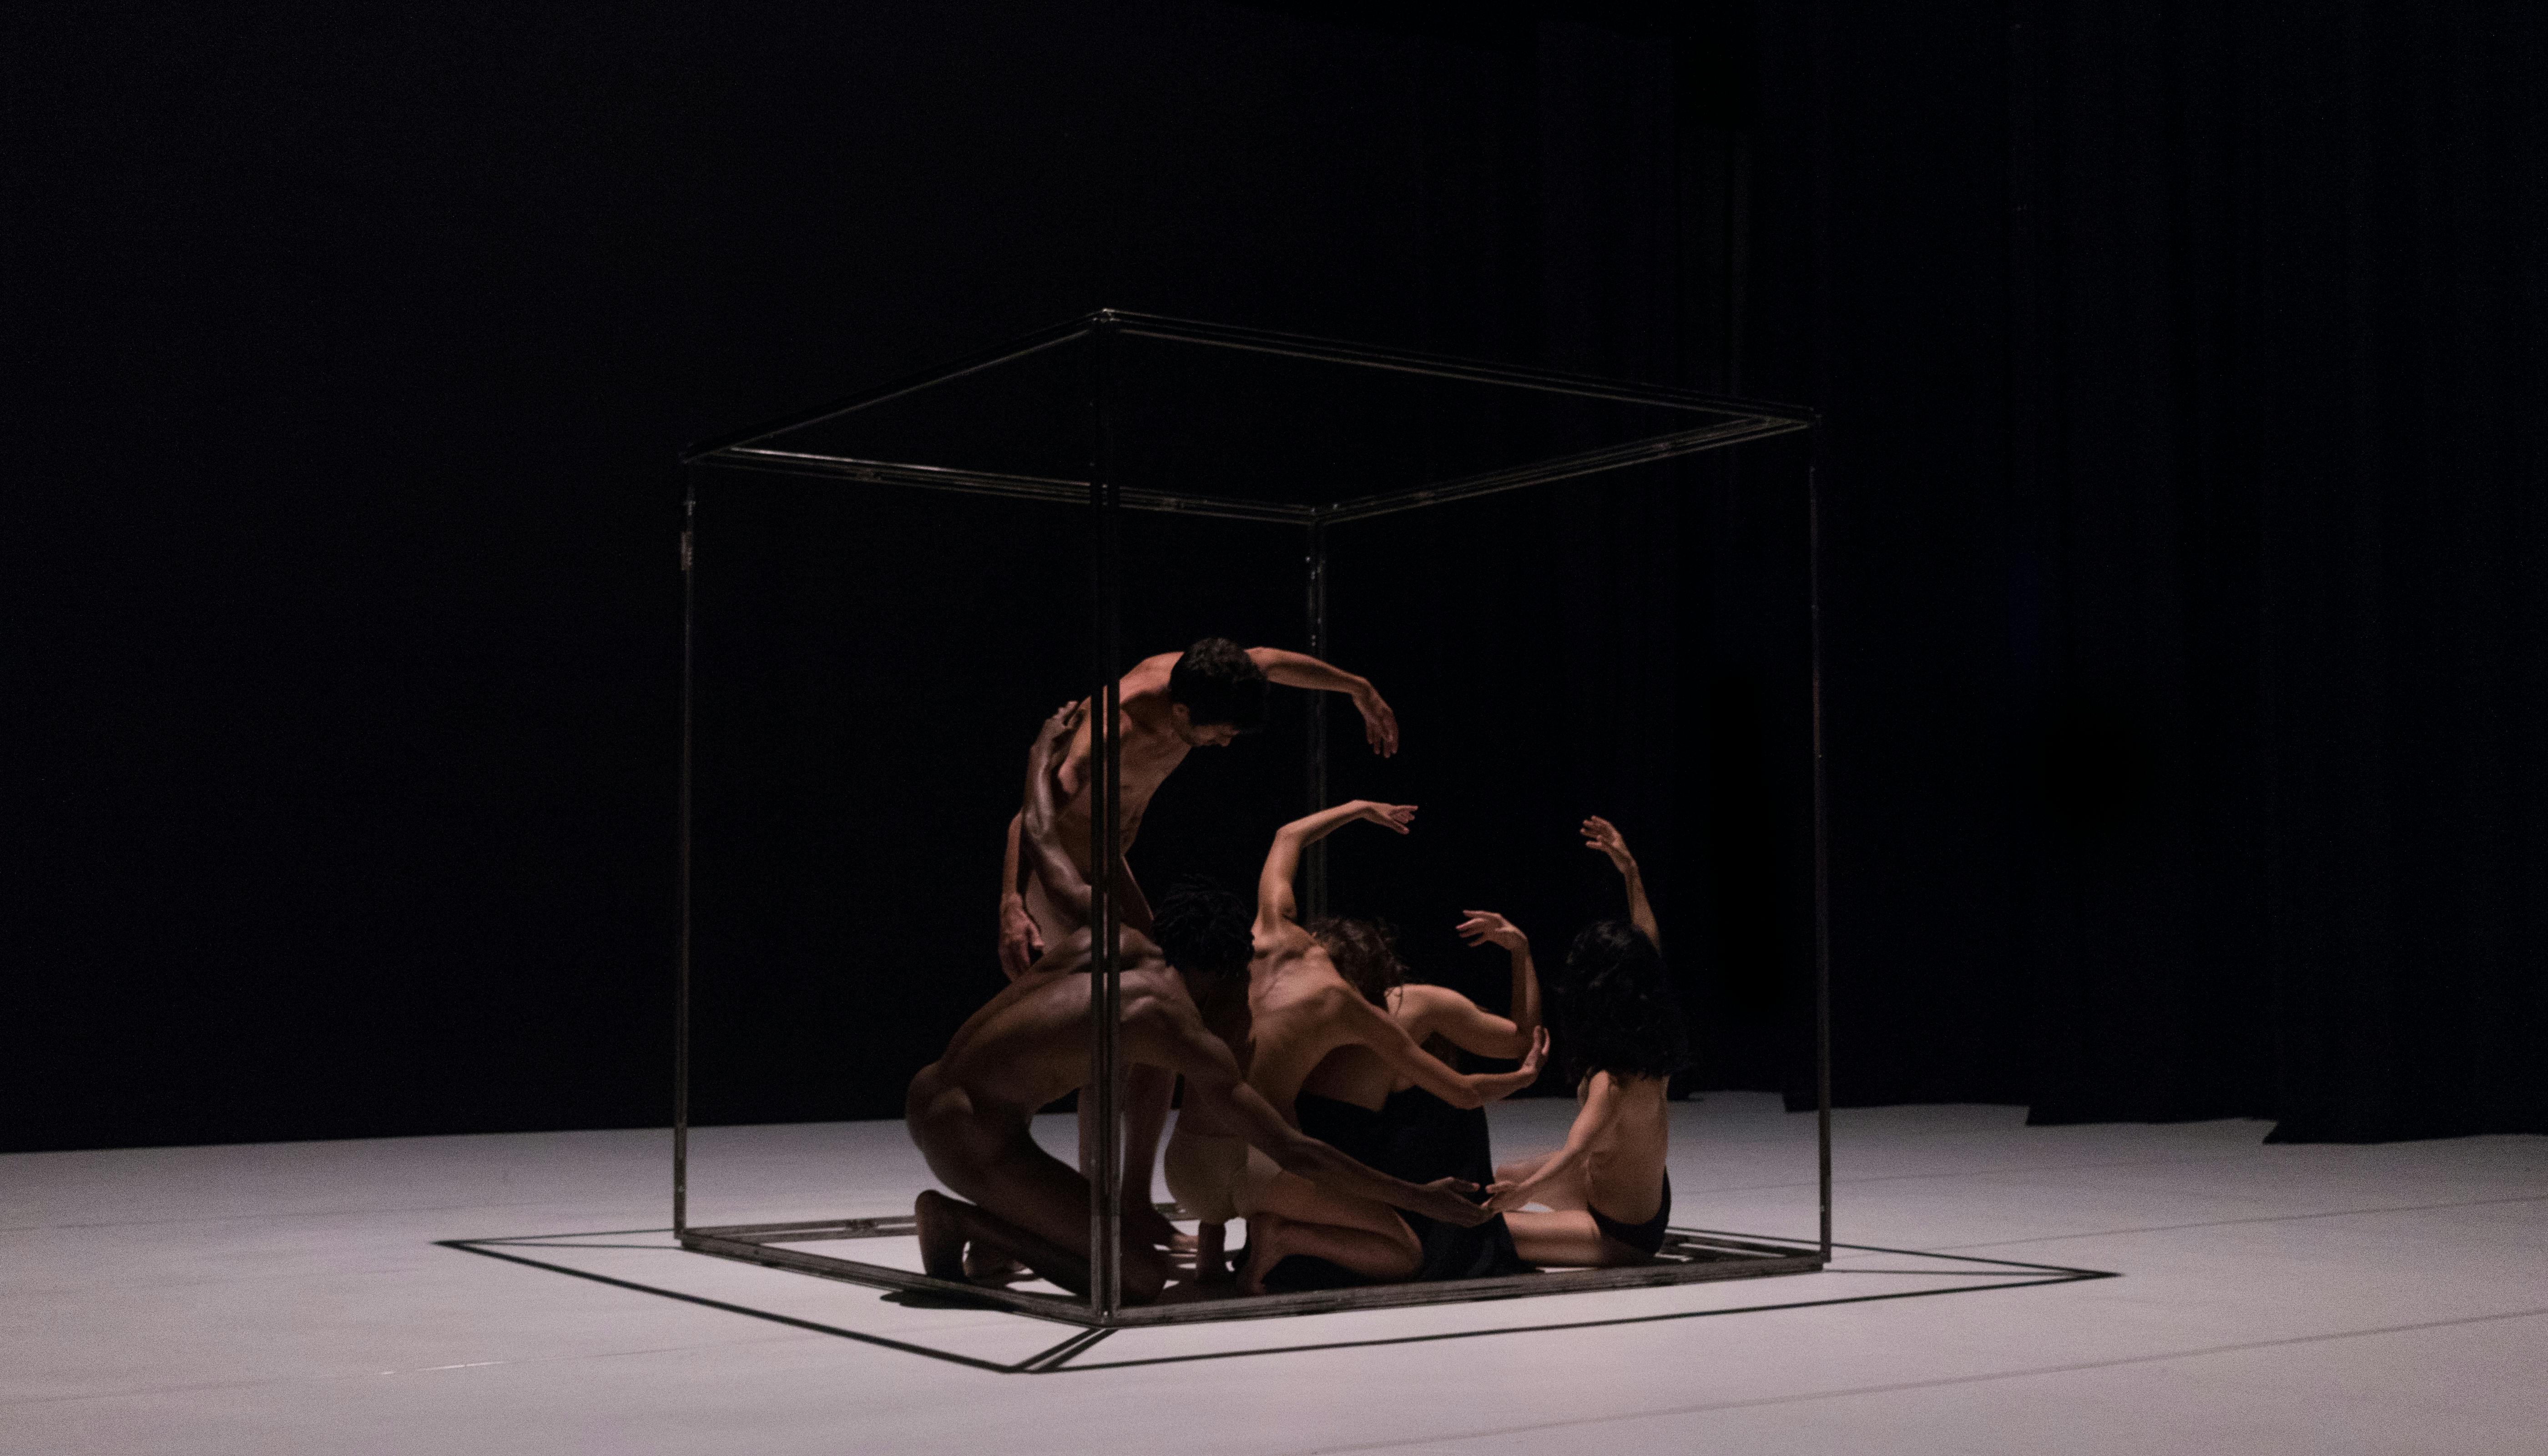 At the center of the stage there is a cubic metal structure. Inside it a few dancers are moving. Their bodies are naked.